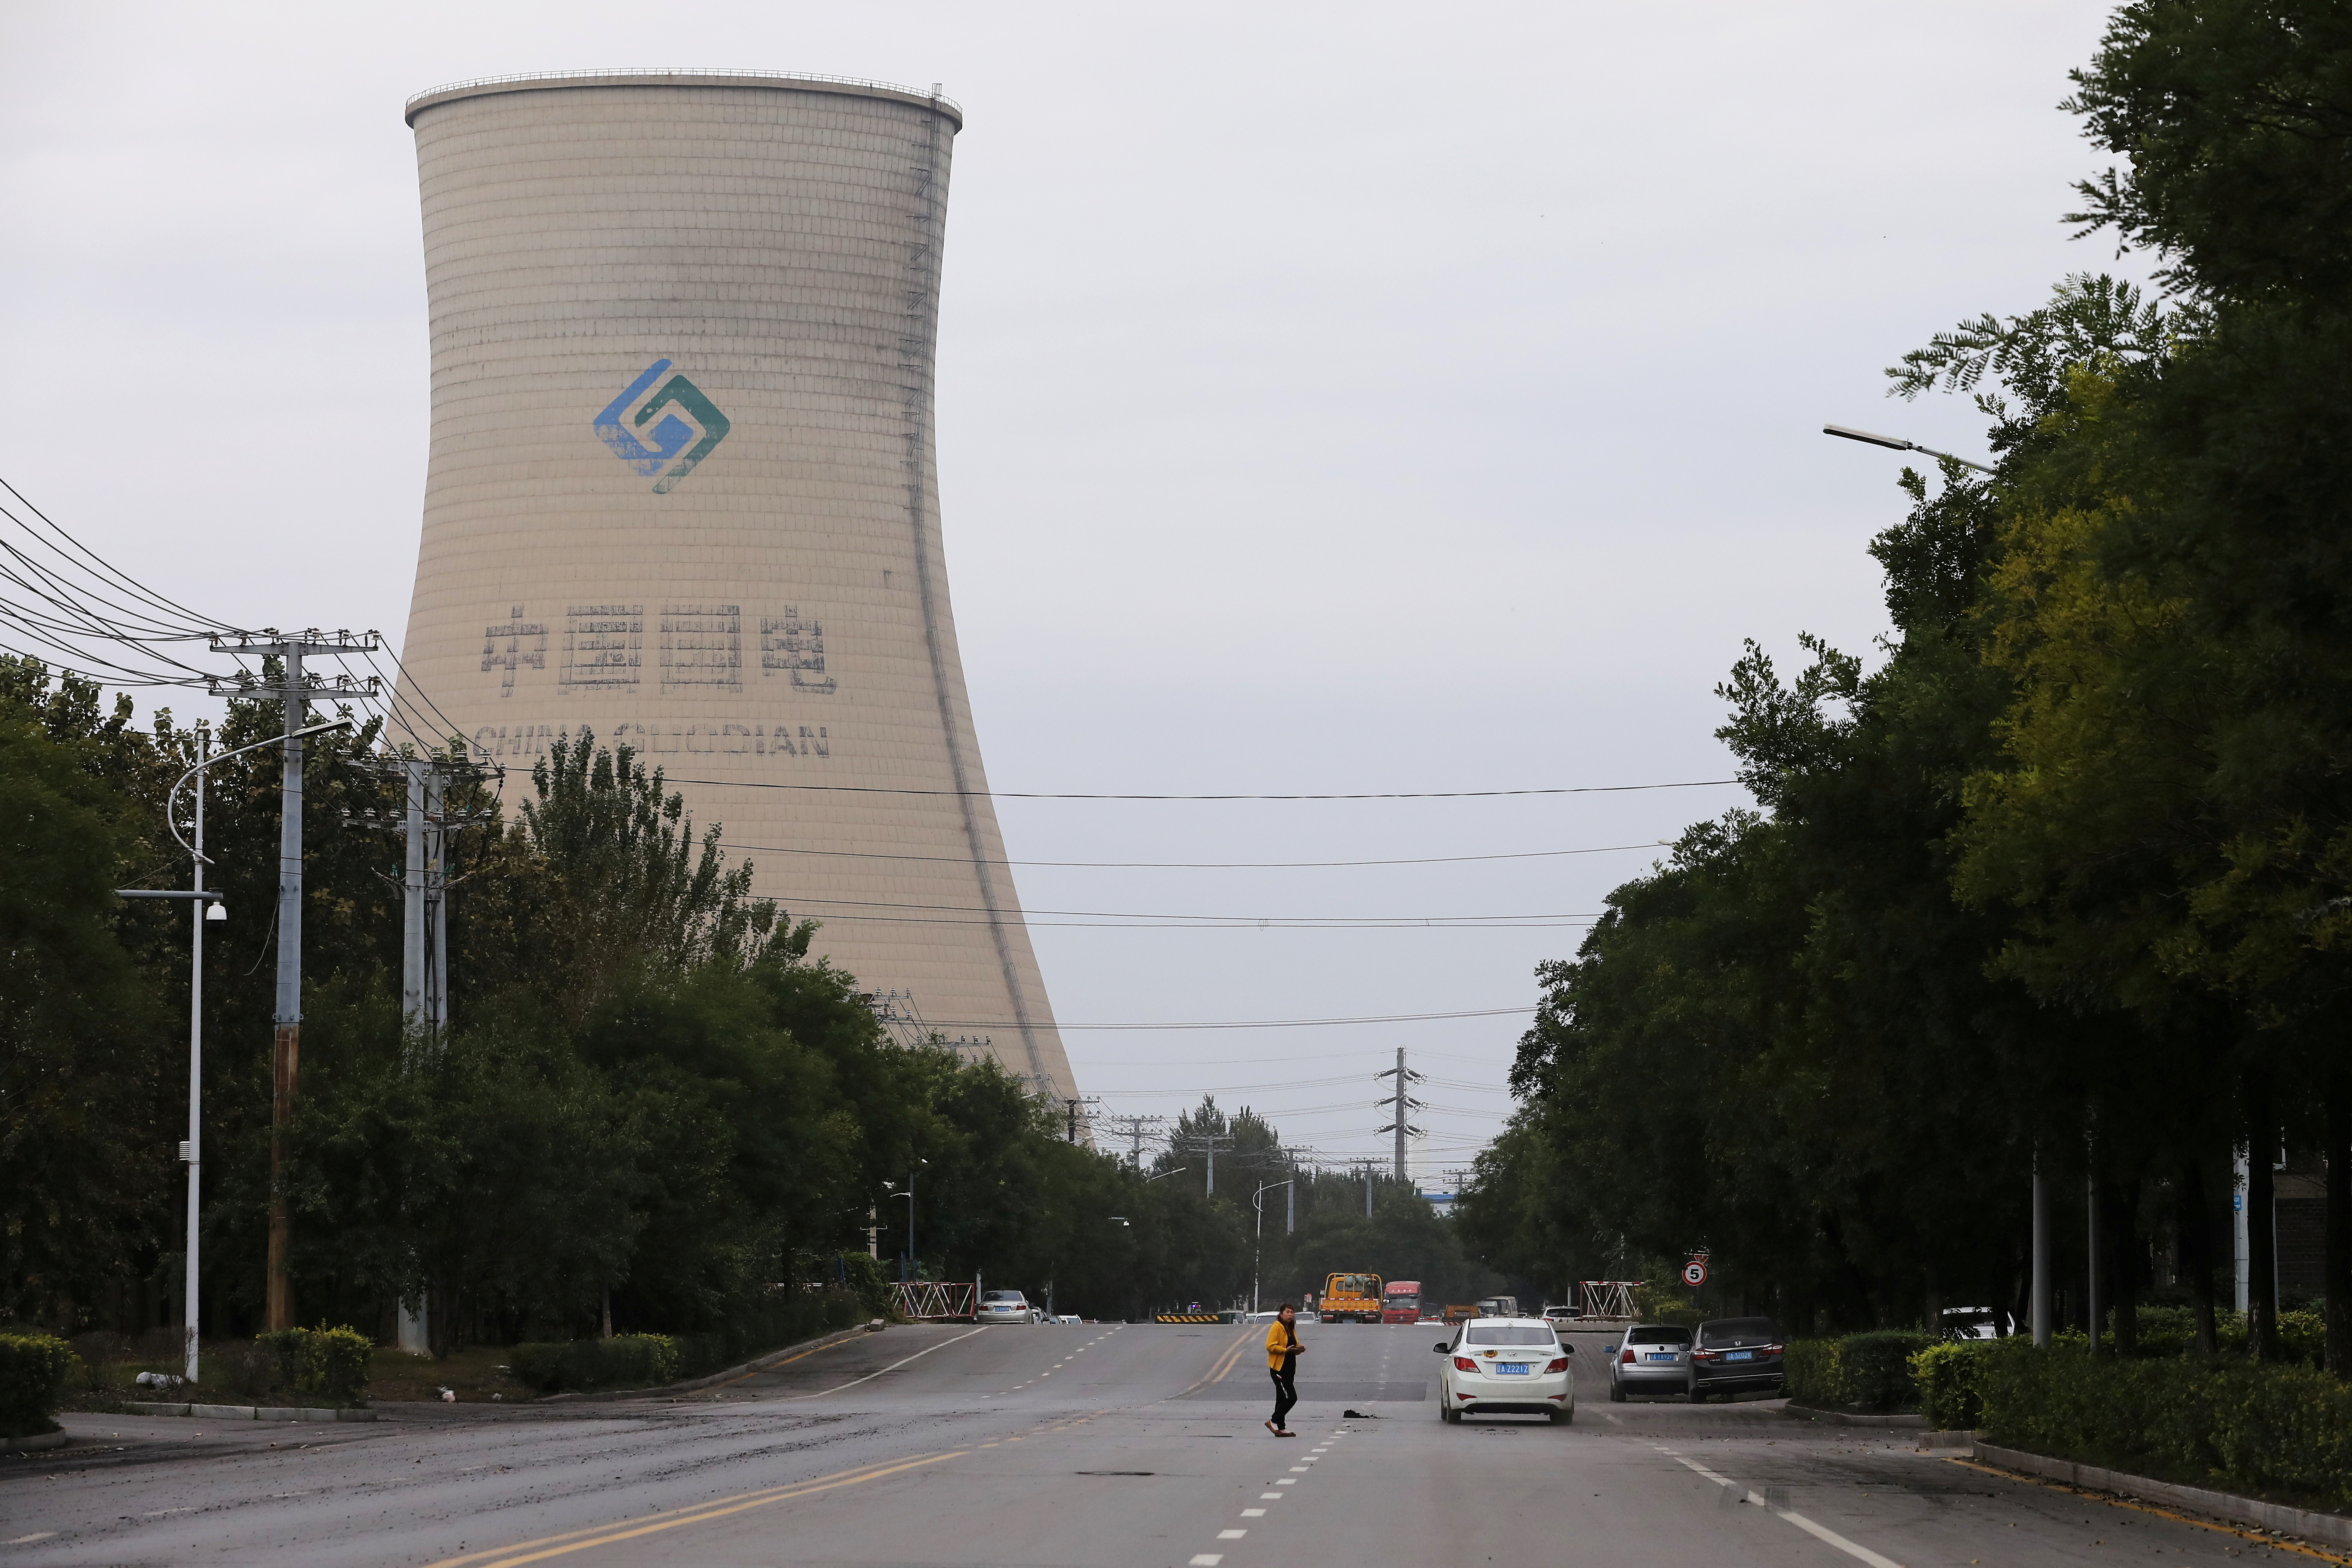 Person walks near a China Energy coal-fired power plant in Shenyang, Liaoning